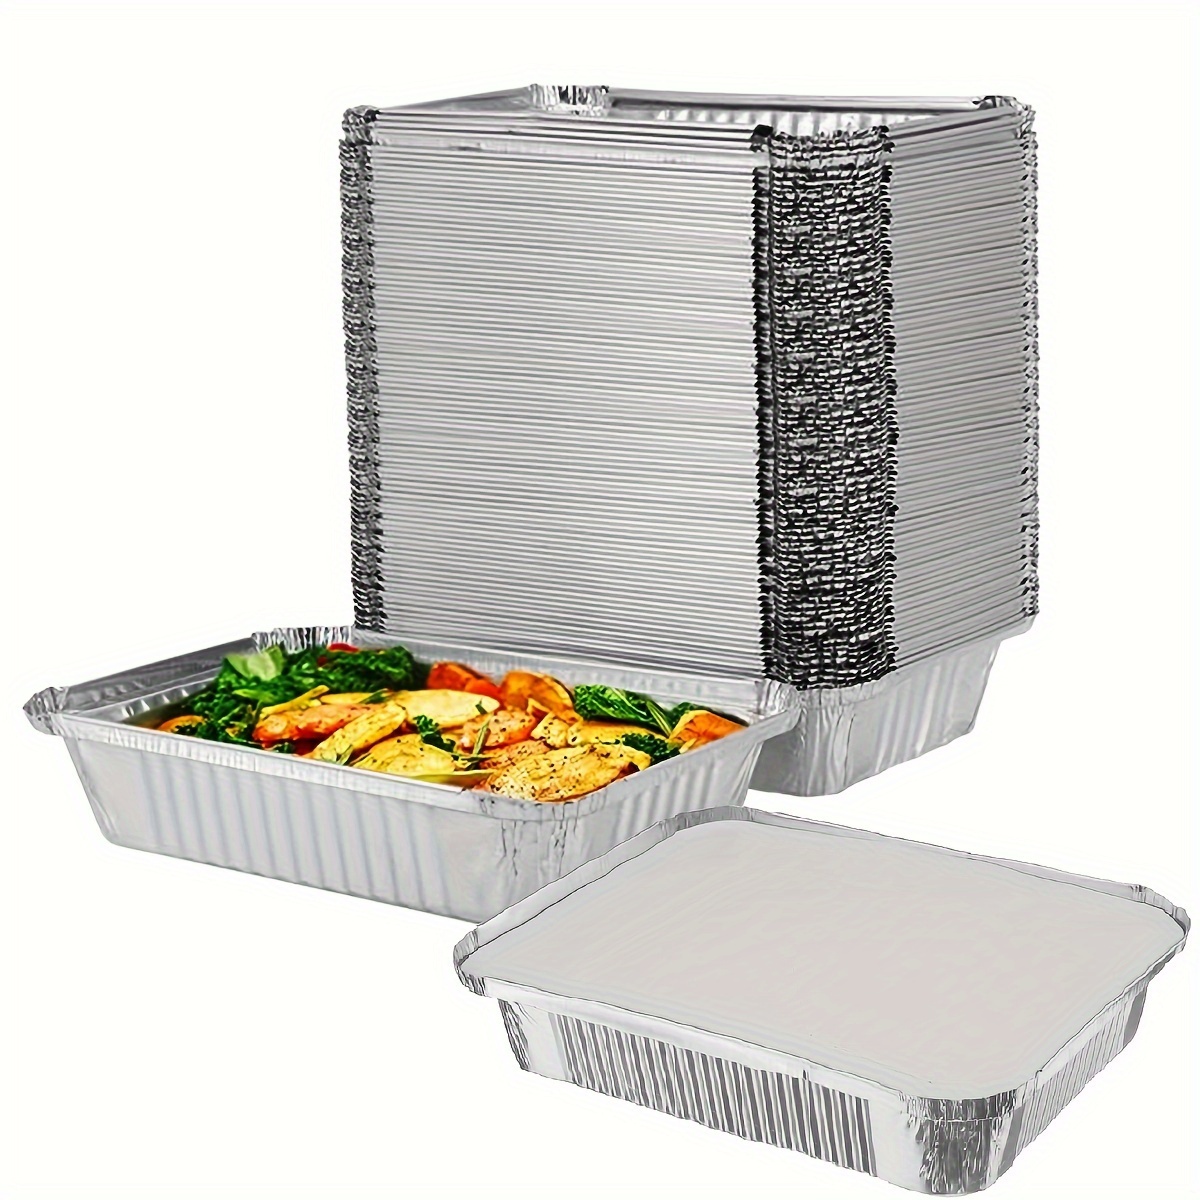 Disposable Aluminum Foil Steam Roaster Pans Heavy Duty Baking Roasting  Broiling 20 X 13 X 3 (60)